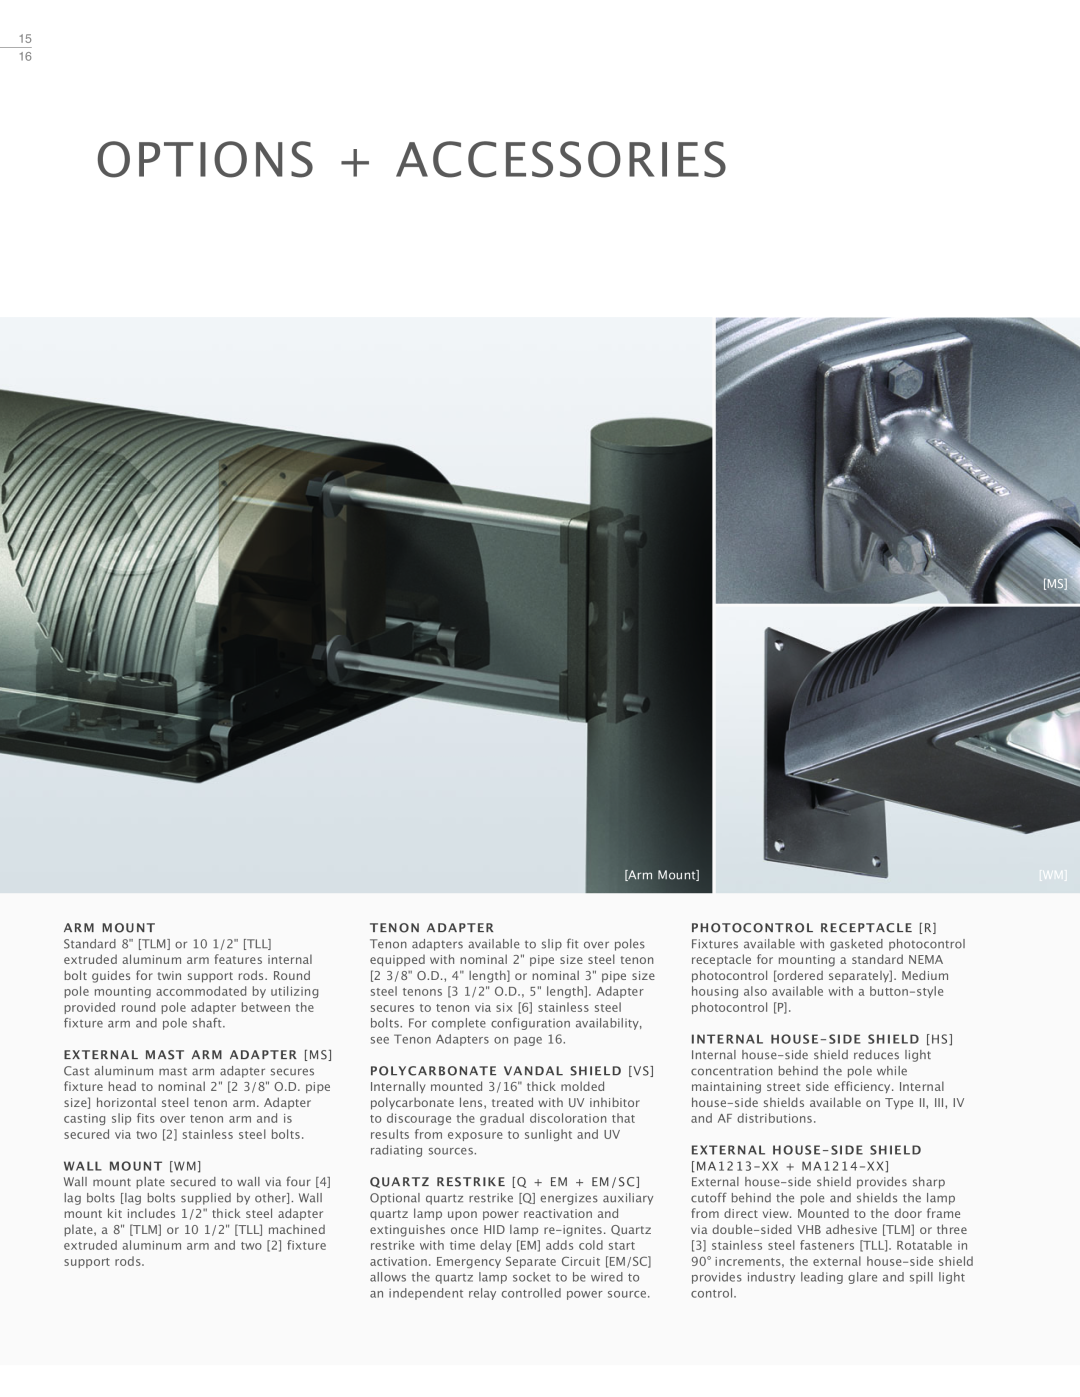 Cooper Lighting Architectural Area Luminaire Options + Accessories, Arm Mount, Tenon Adapter, Photocontrol Receptacle R 